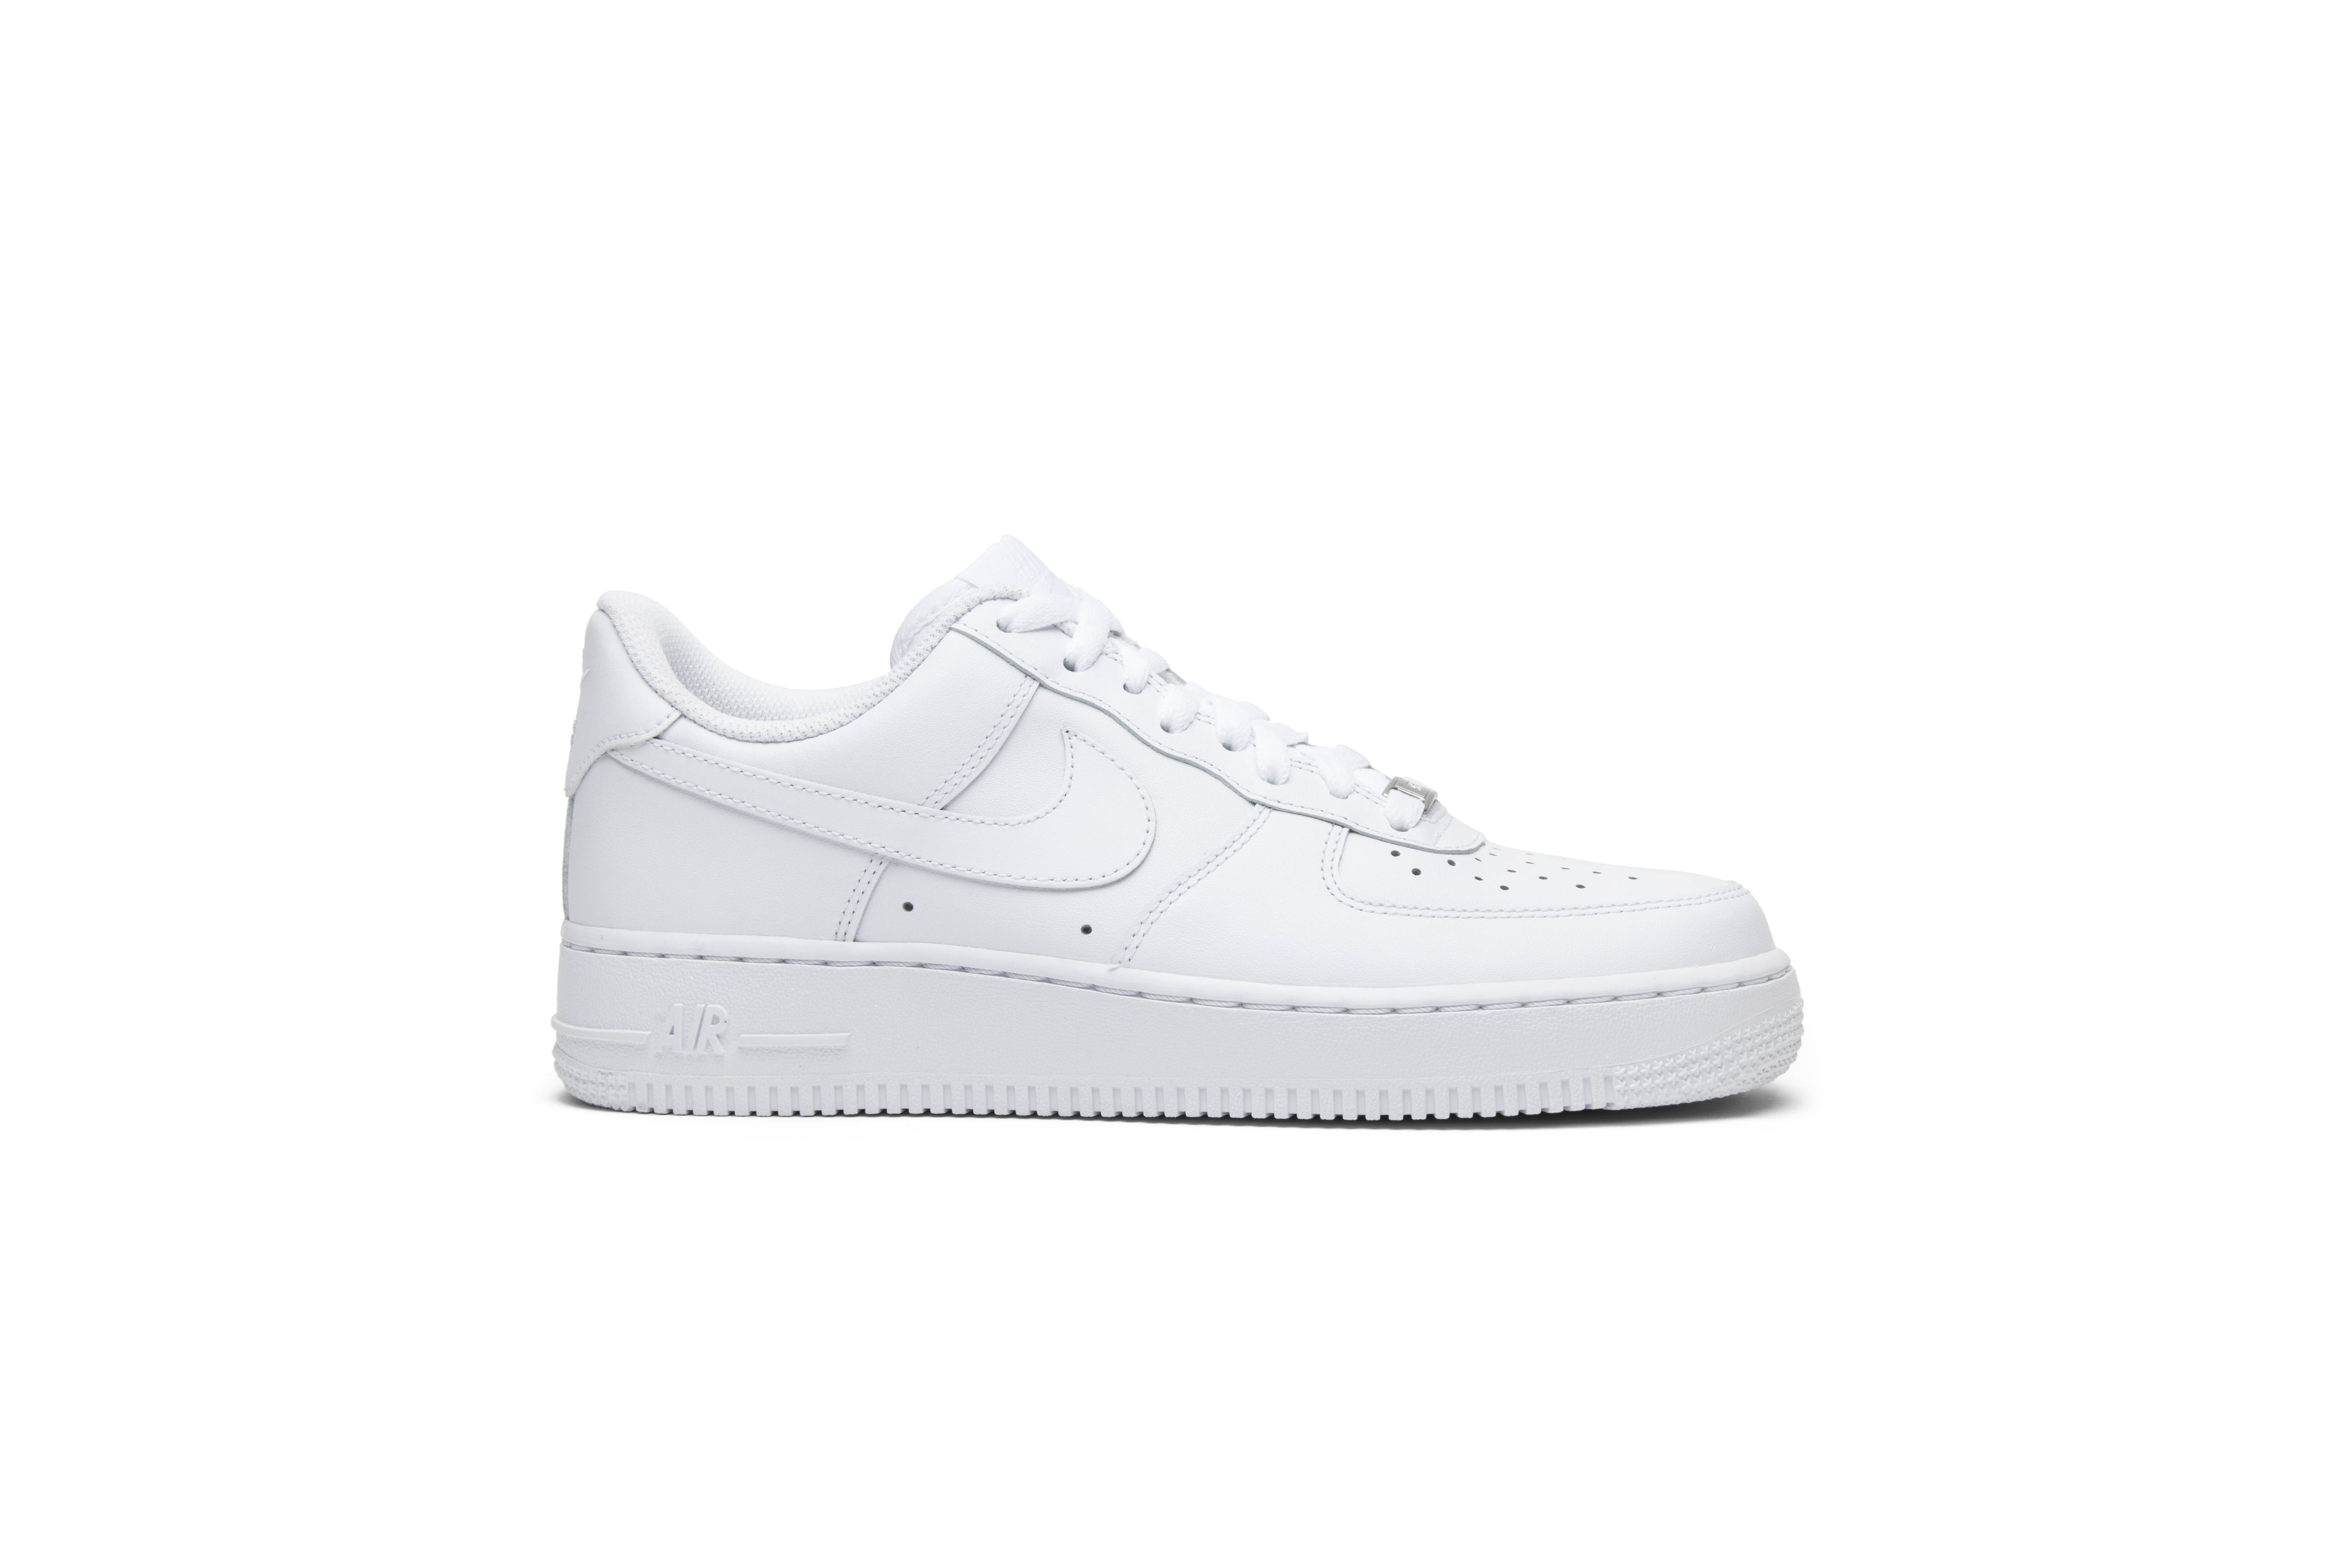 air force one off white blue